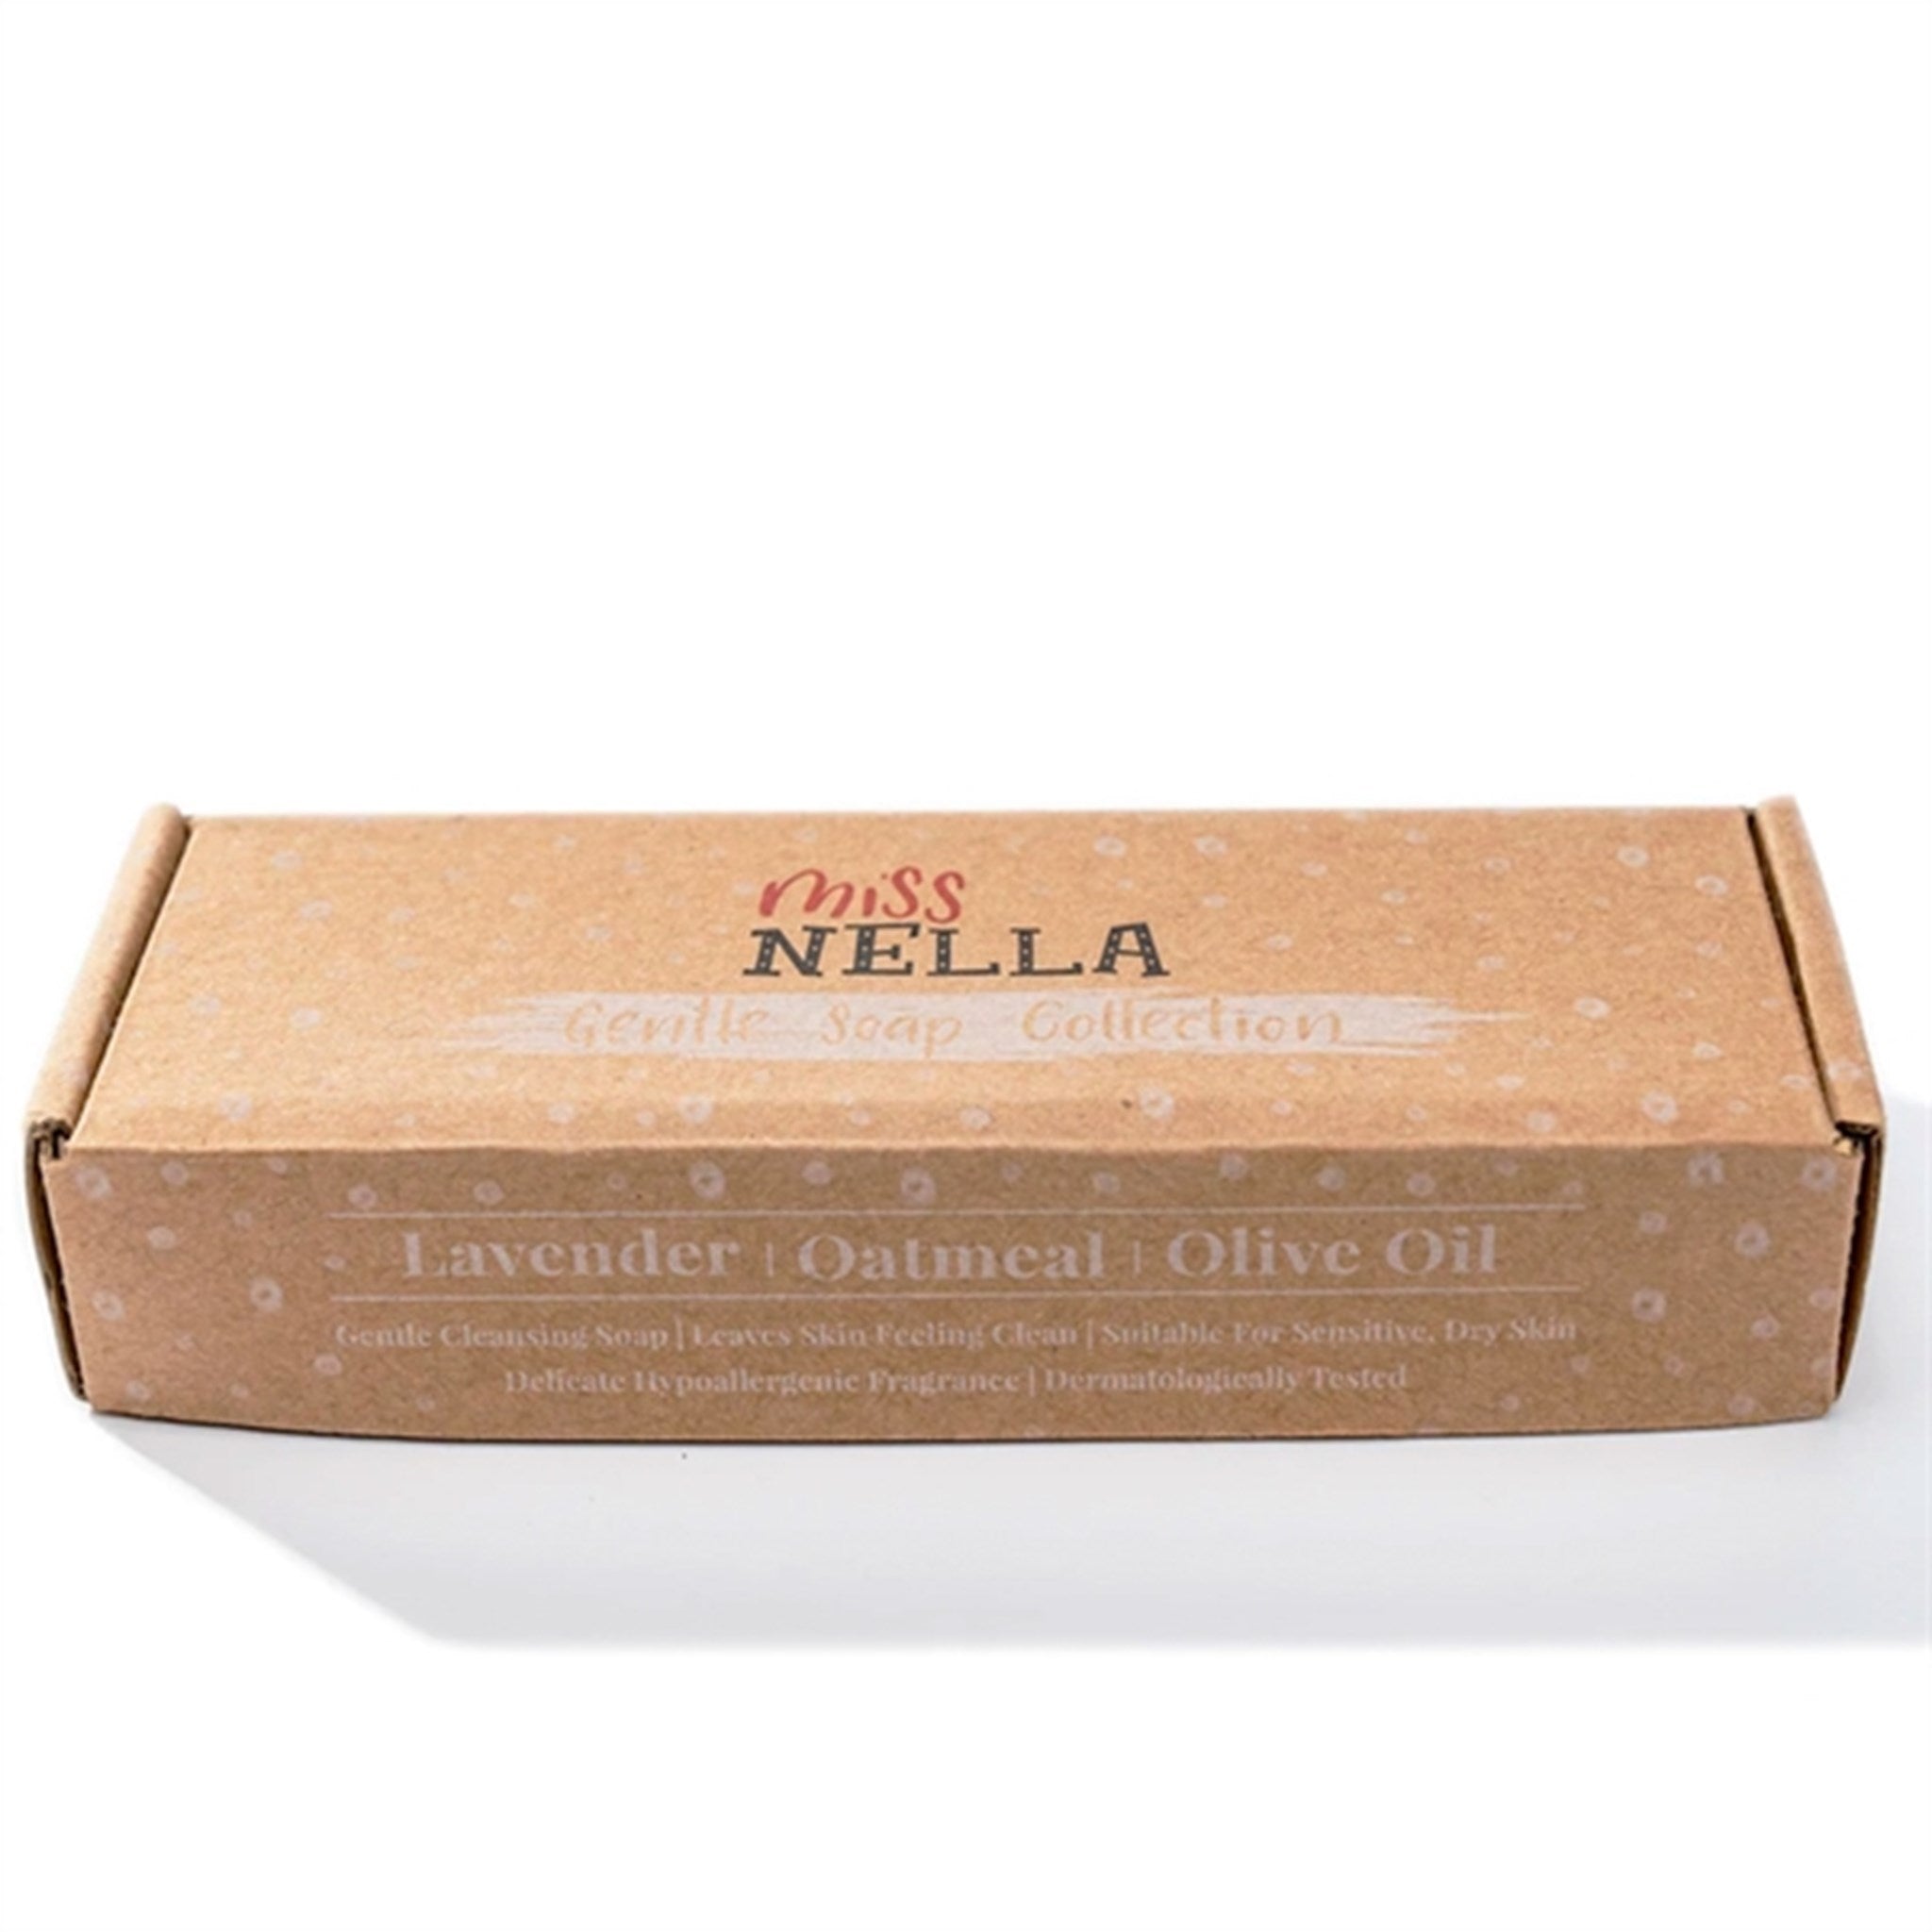 Miss Nella Gentle Soap 3-pack